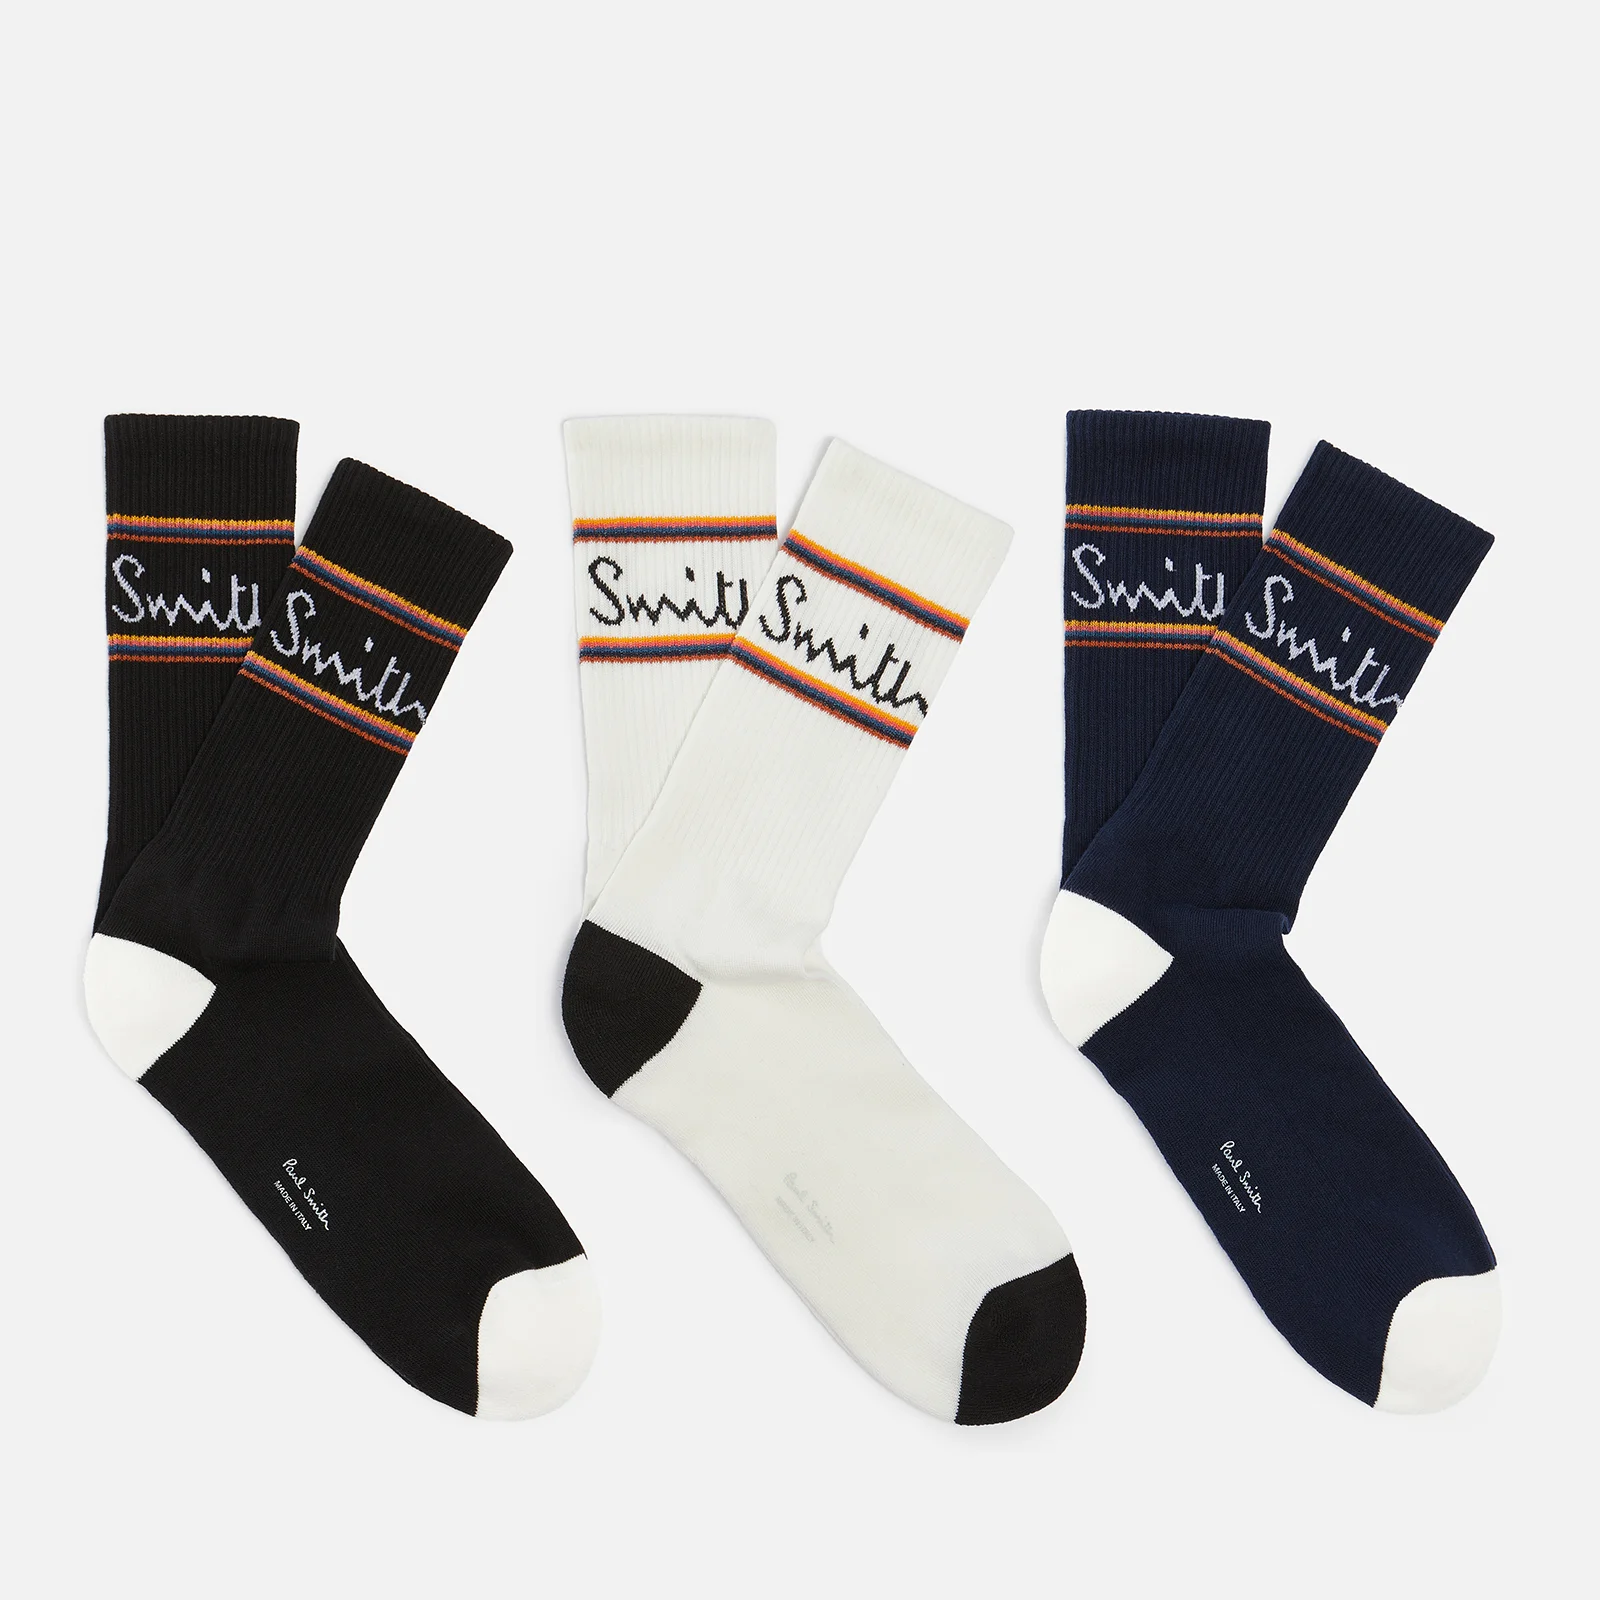 PS Paul Smith Three-Pack Cotton-Blend Socks Image 1